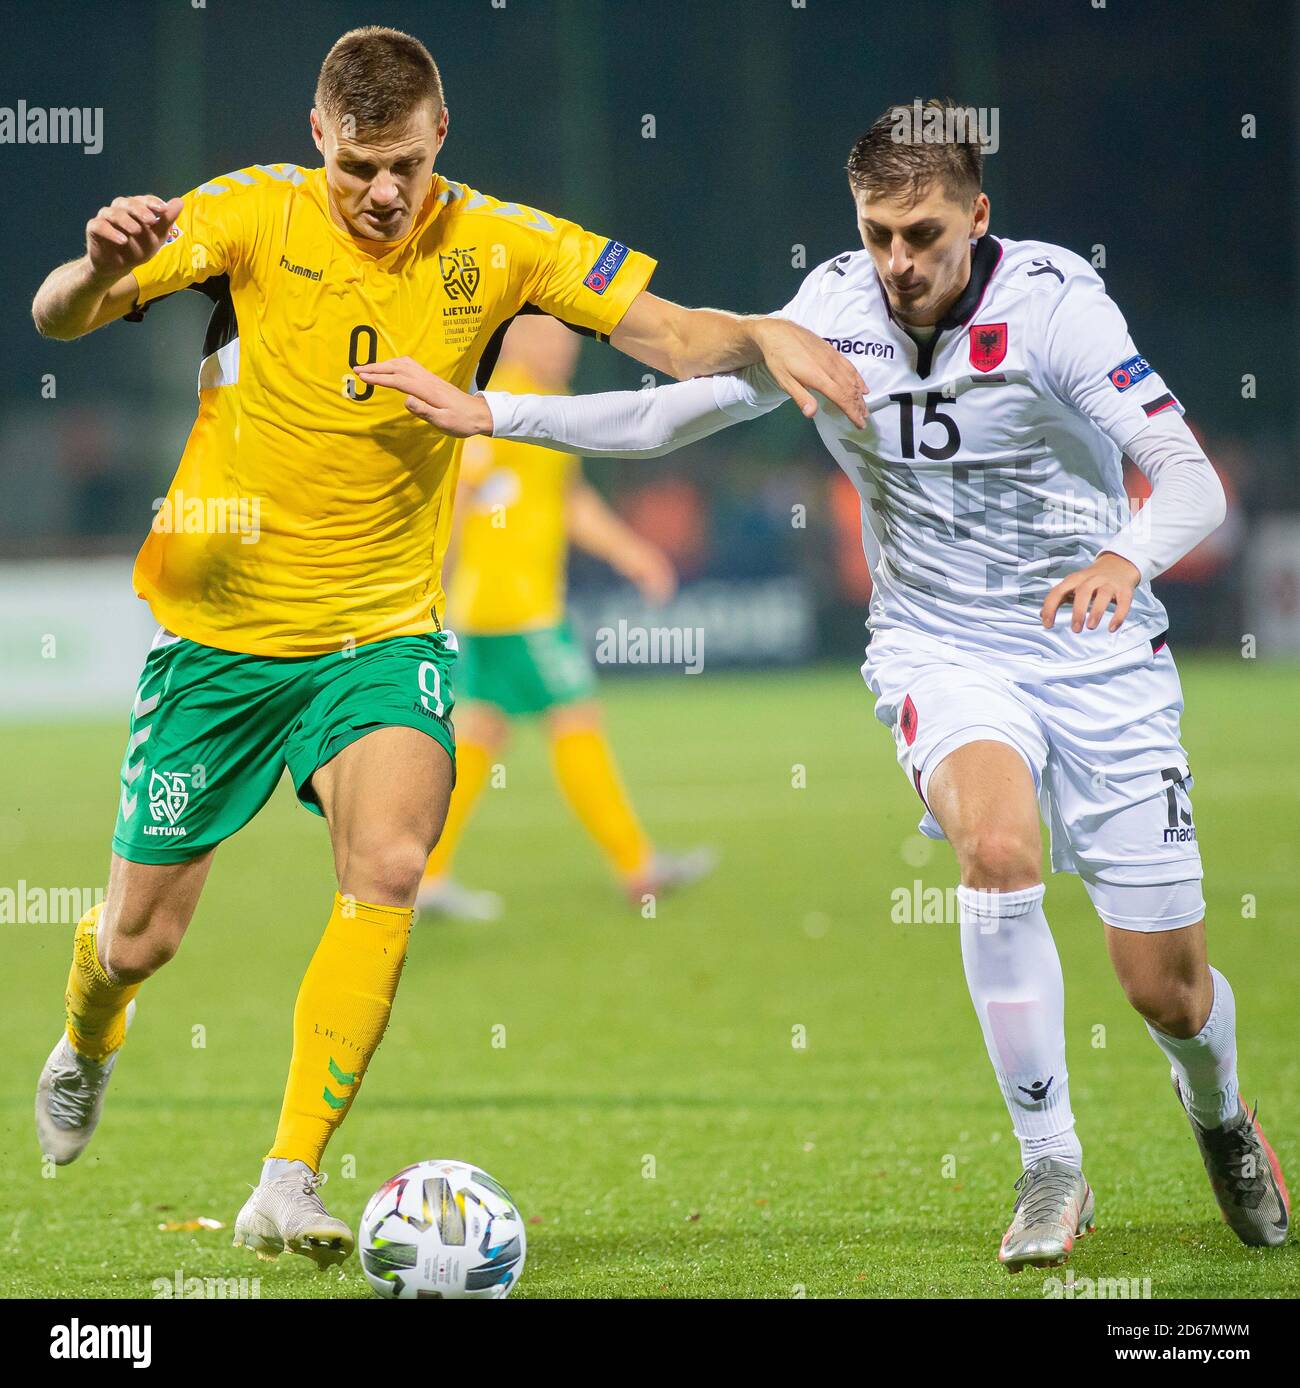 Vilnius, Lithuania. 14th Oct, 2020. Karolis Laukzemis (L) of Lithuania vies  with Marash Kumbulla of Albania during their UEFA Nations League football  match in Vilnius, Lithuania, on Oct. 14, 2020. Credit: Alfredas